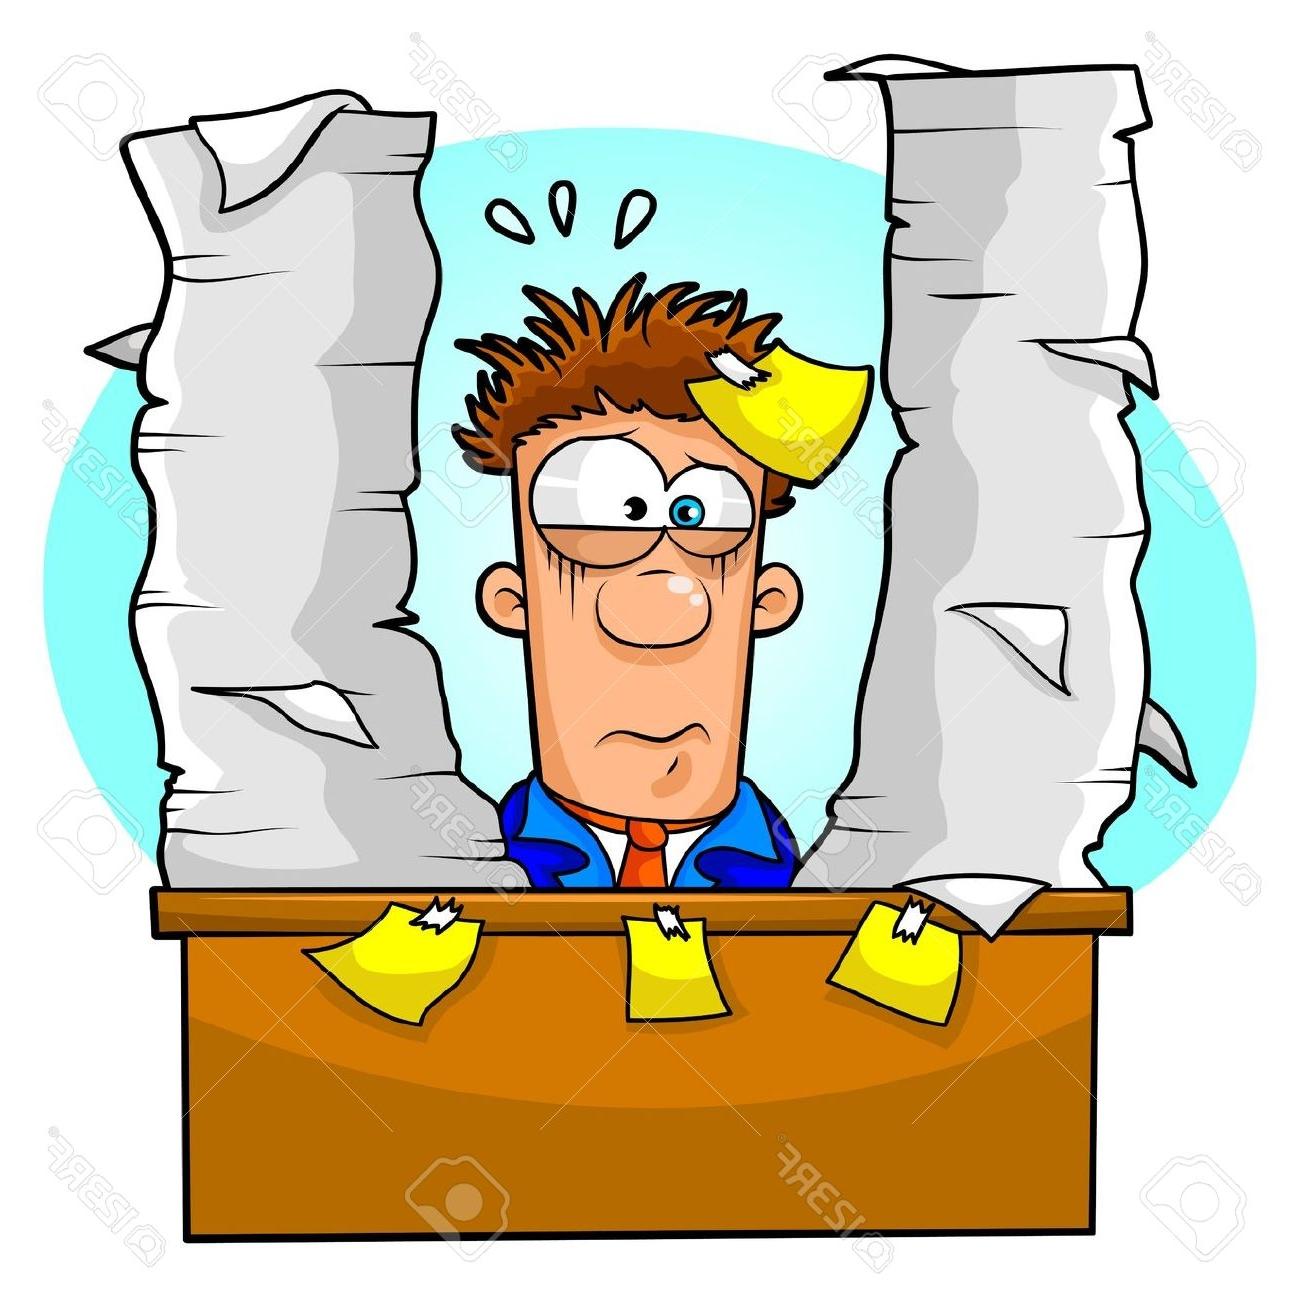 Frazzled person clipart 5 » Clipart Station.